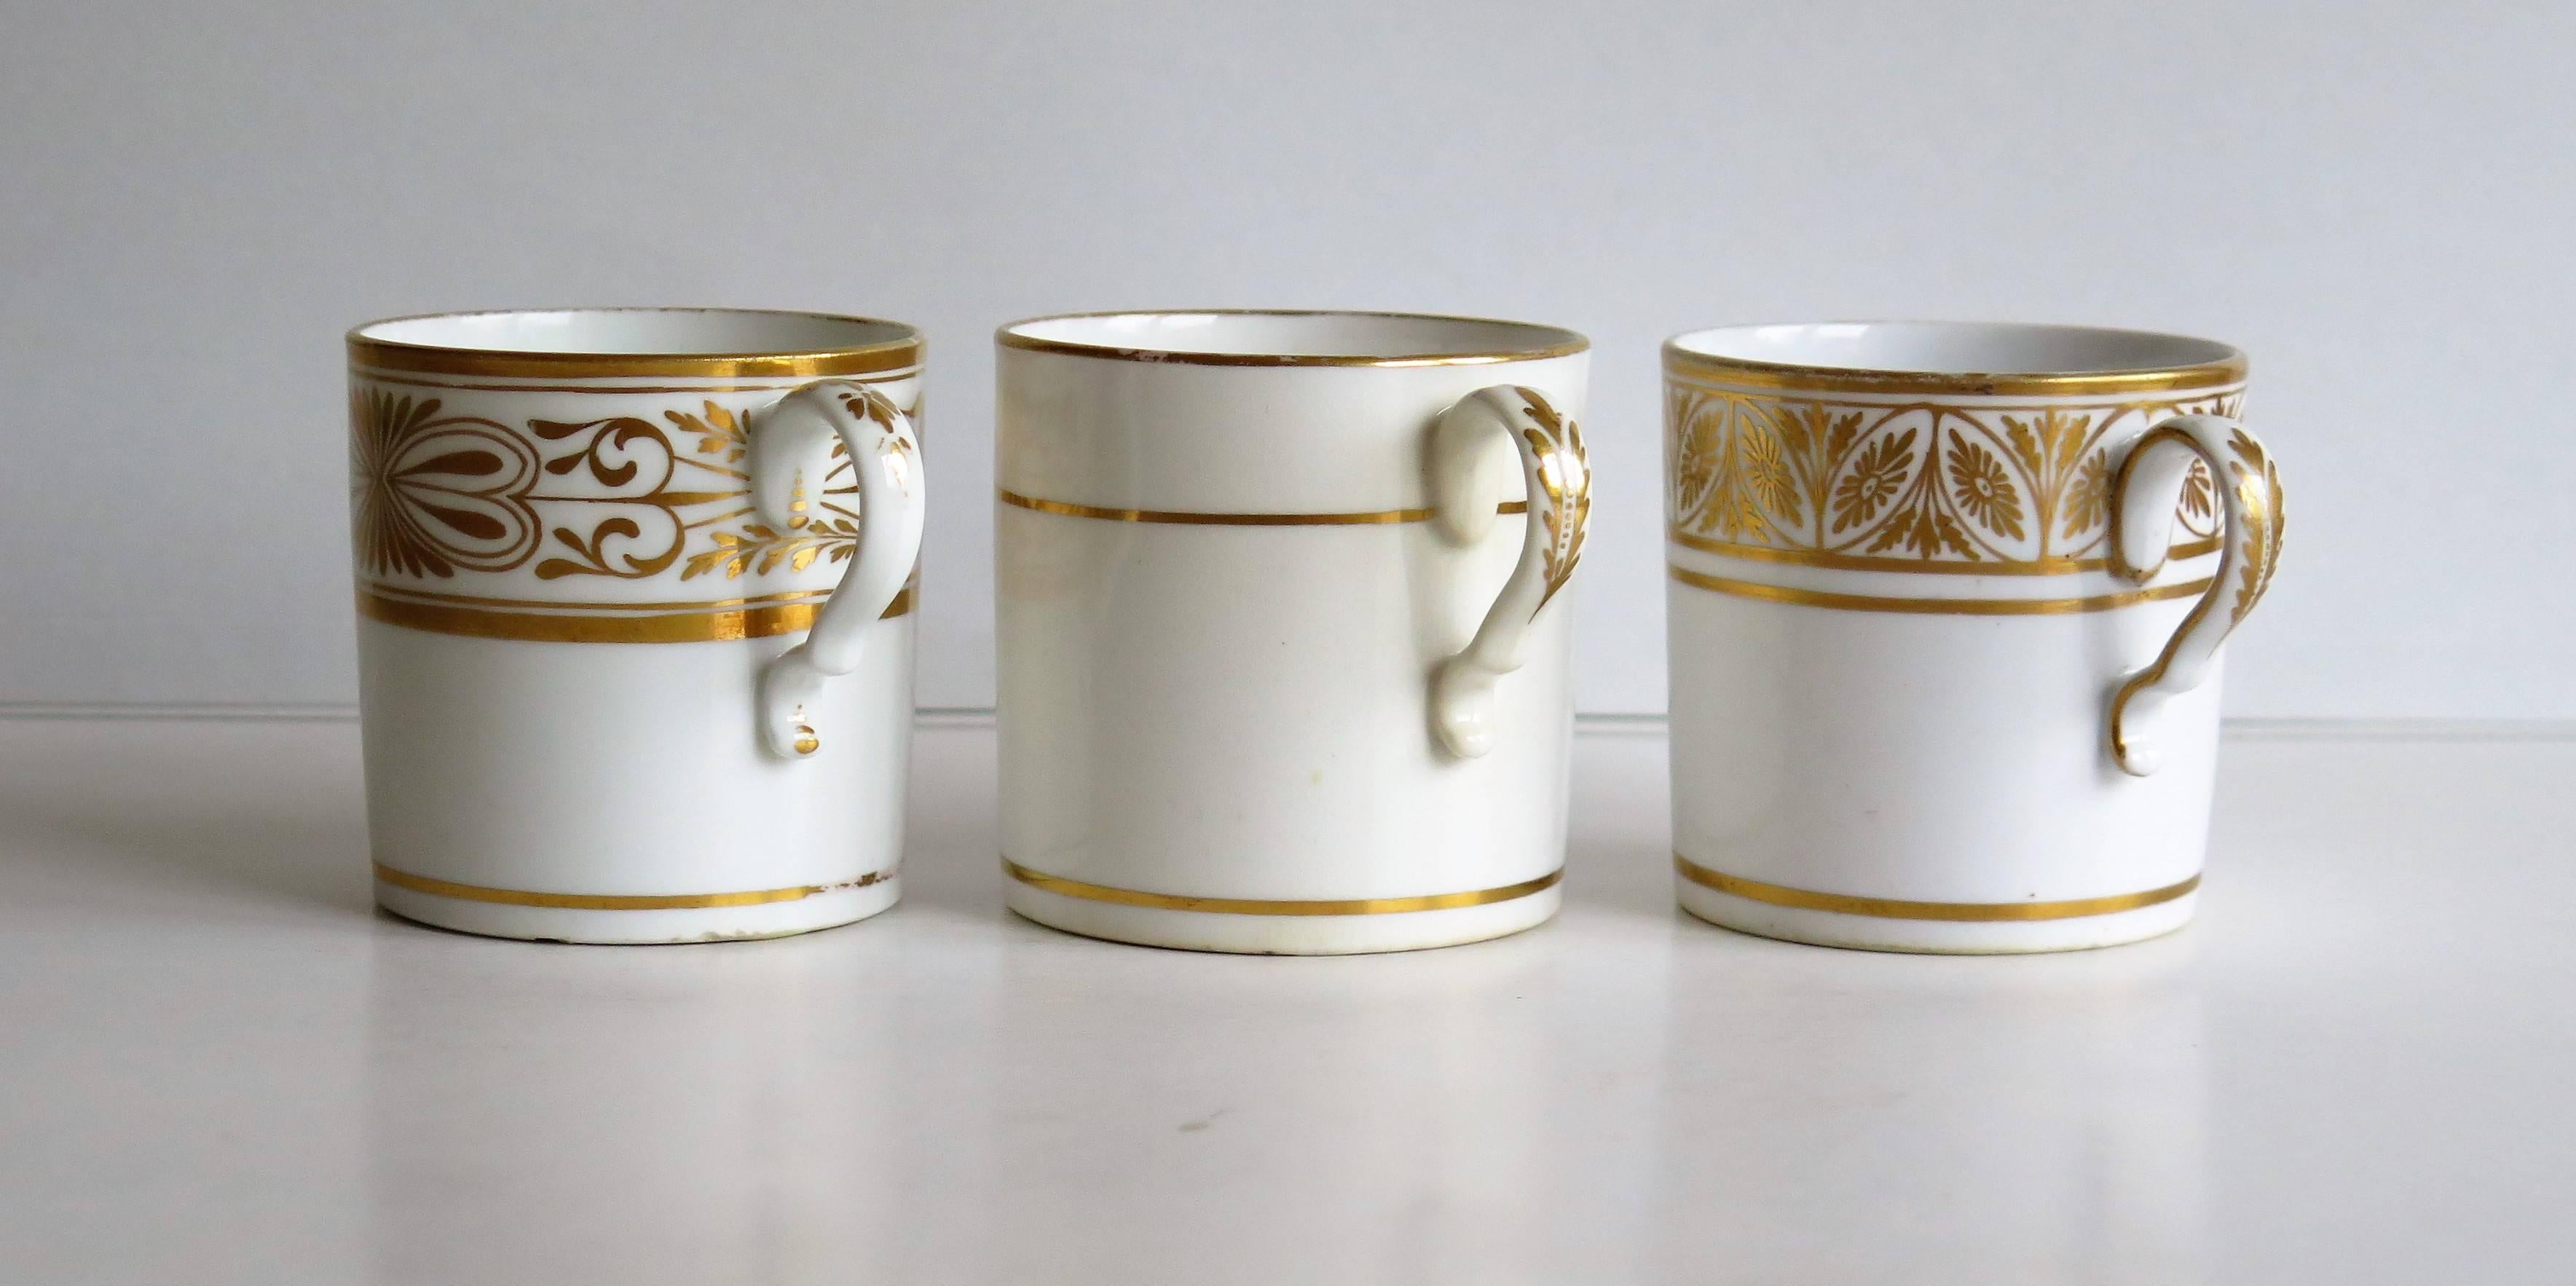 These are a set of THREE different examples of English George III period, porcelain coffee cans (cups), made by SPODE in the early part of the 19th century, circa 1810.

The cans are nominally straight sided of very similar dimensions and have the